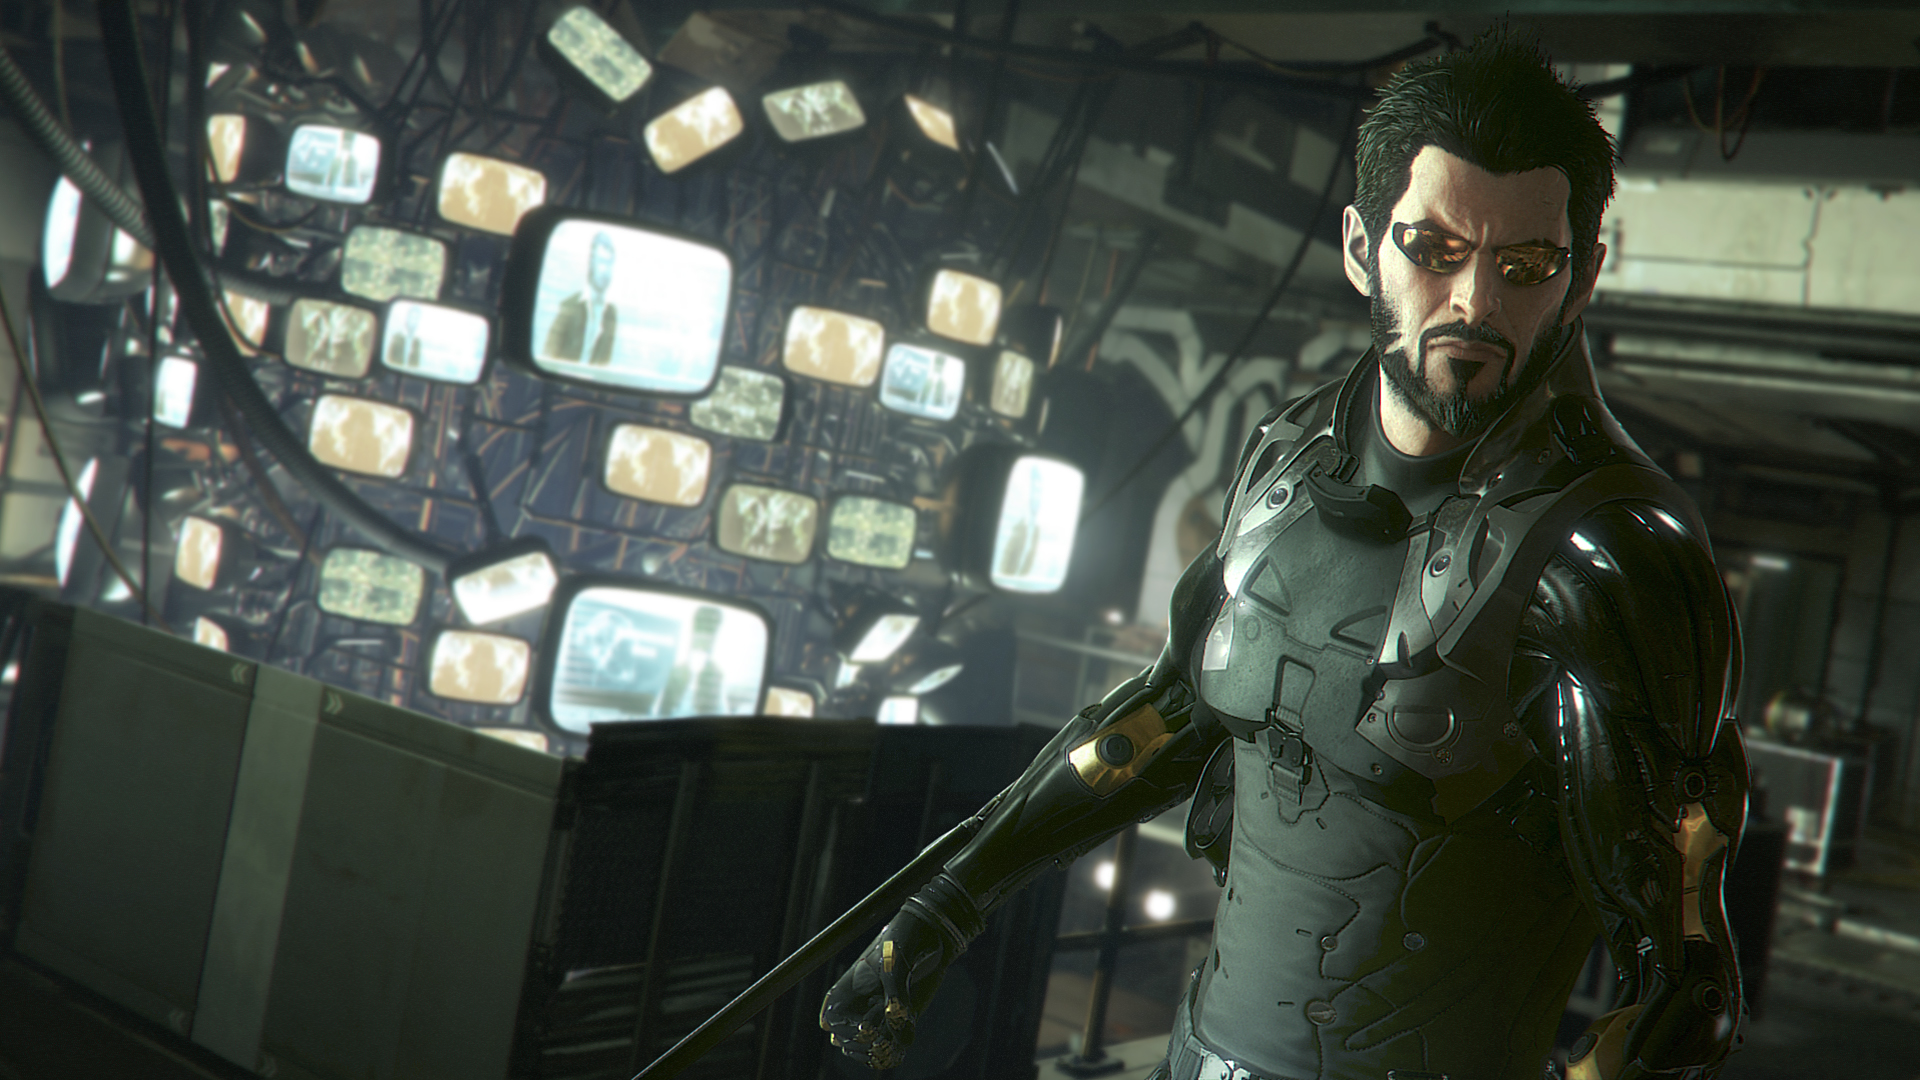  Deus Ex studio aims to return to the series under its new owner, rumors say 